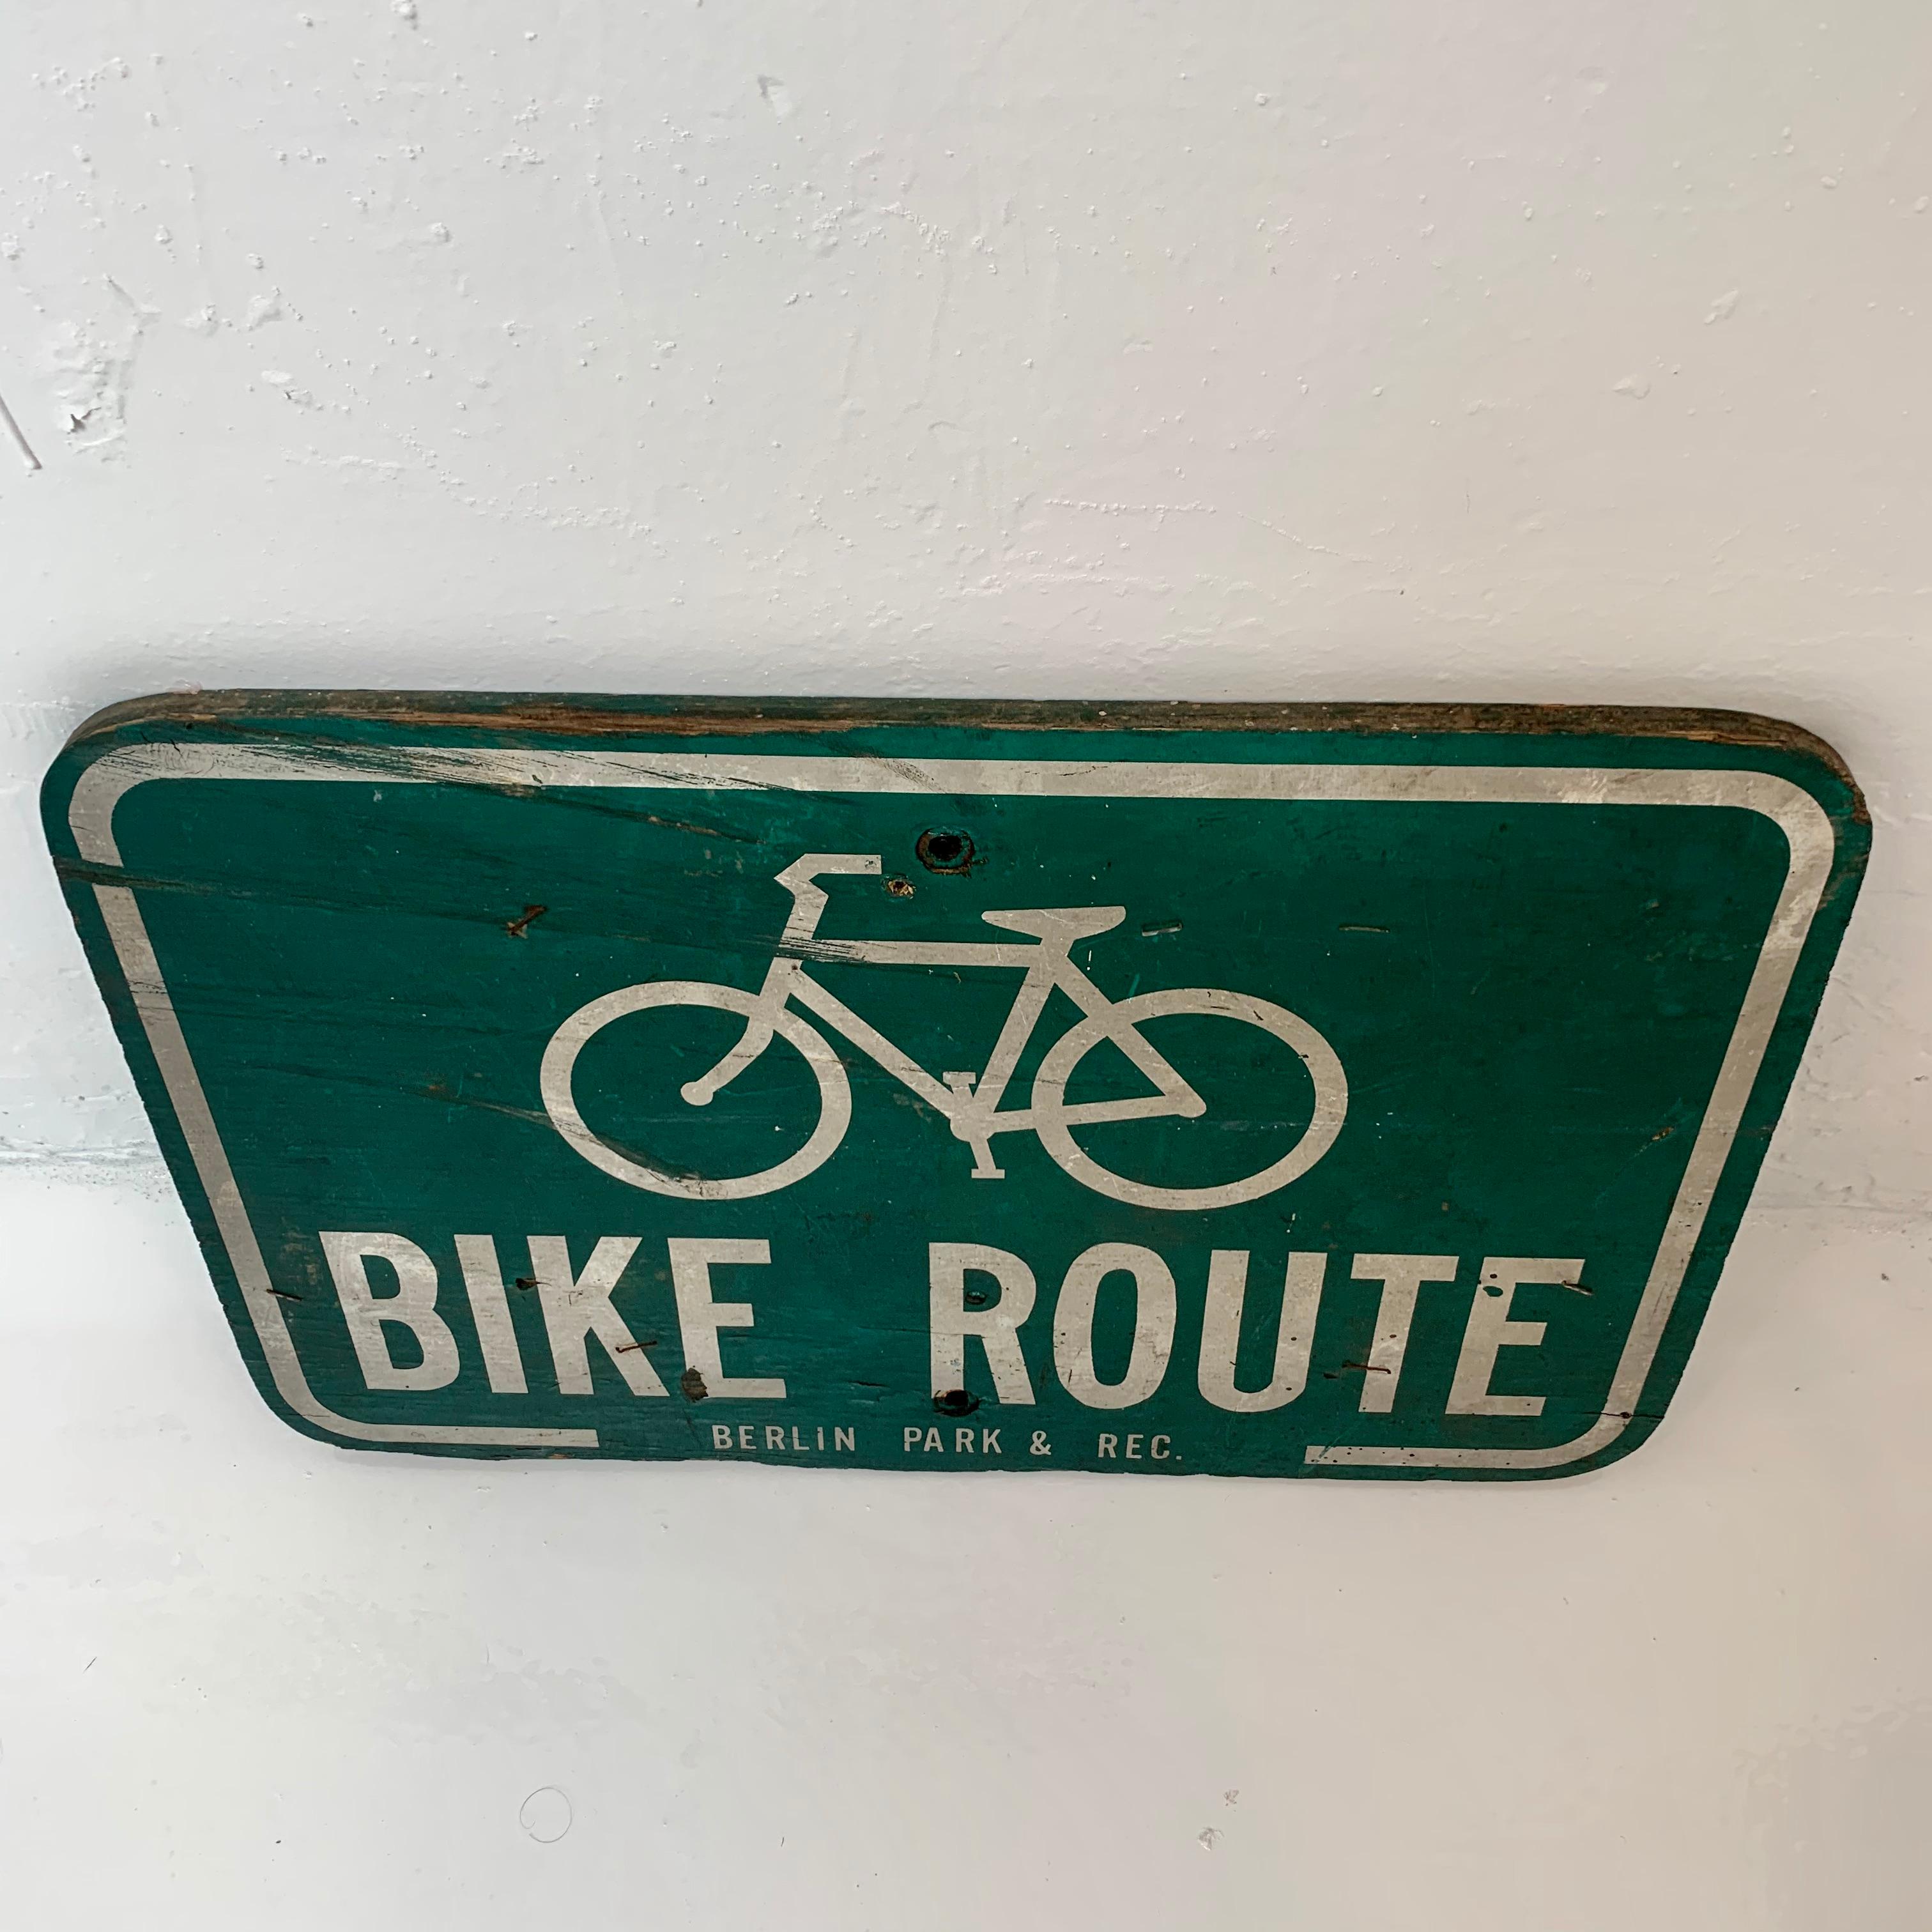 Real metal bike route sign Unused bike route street marker sign 24x18 inches! 